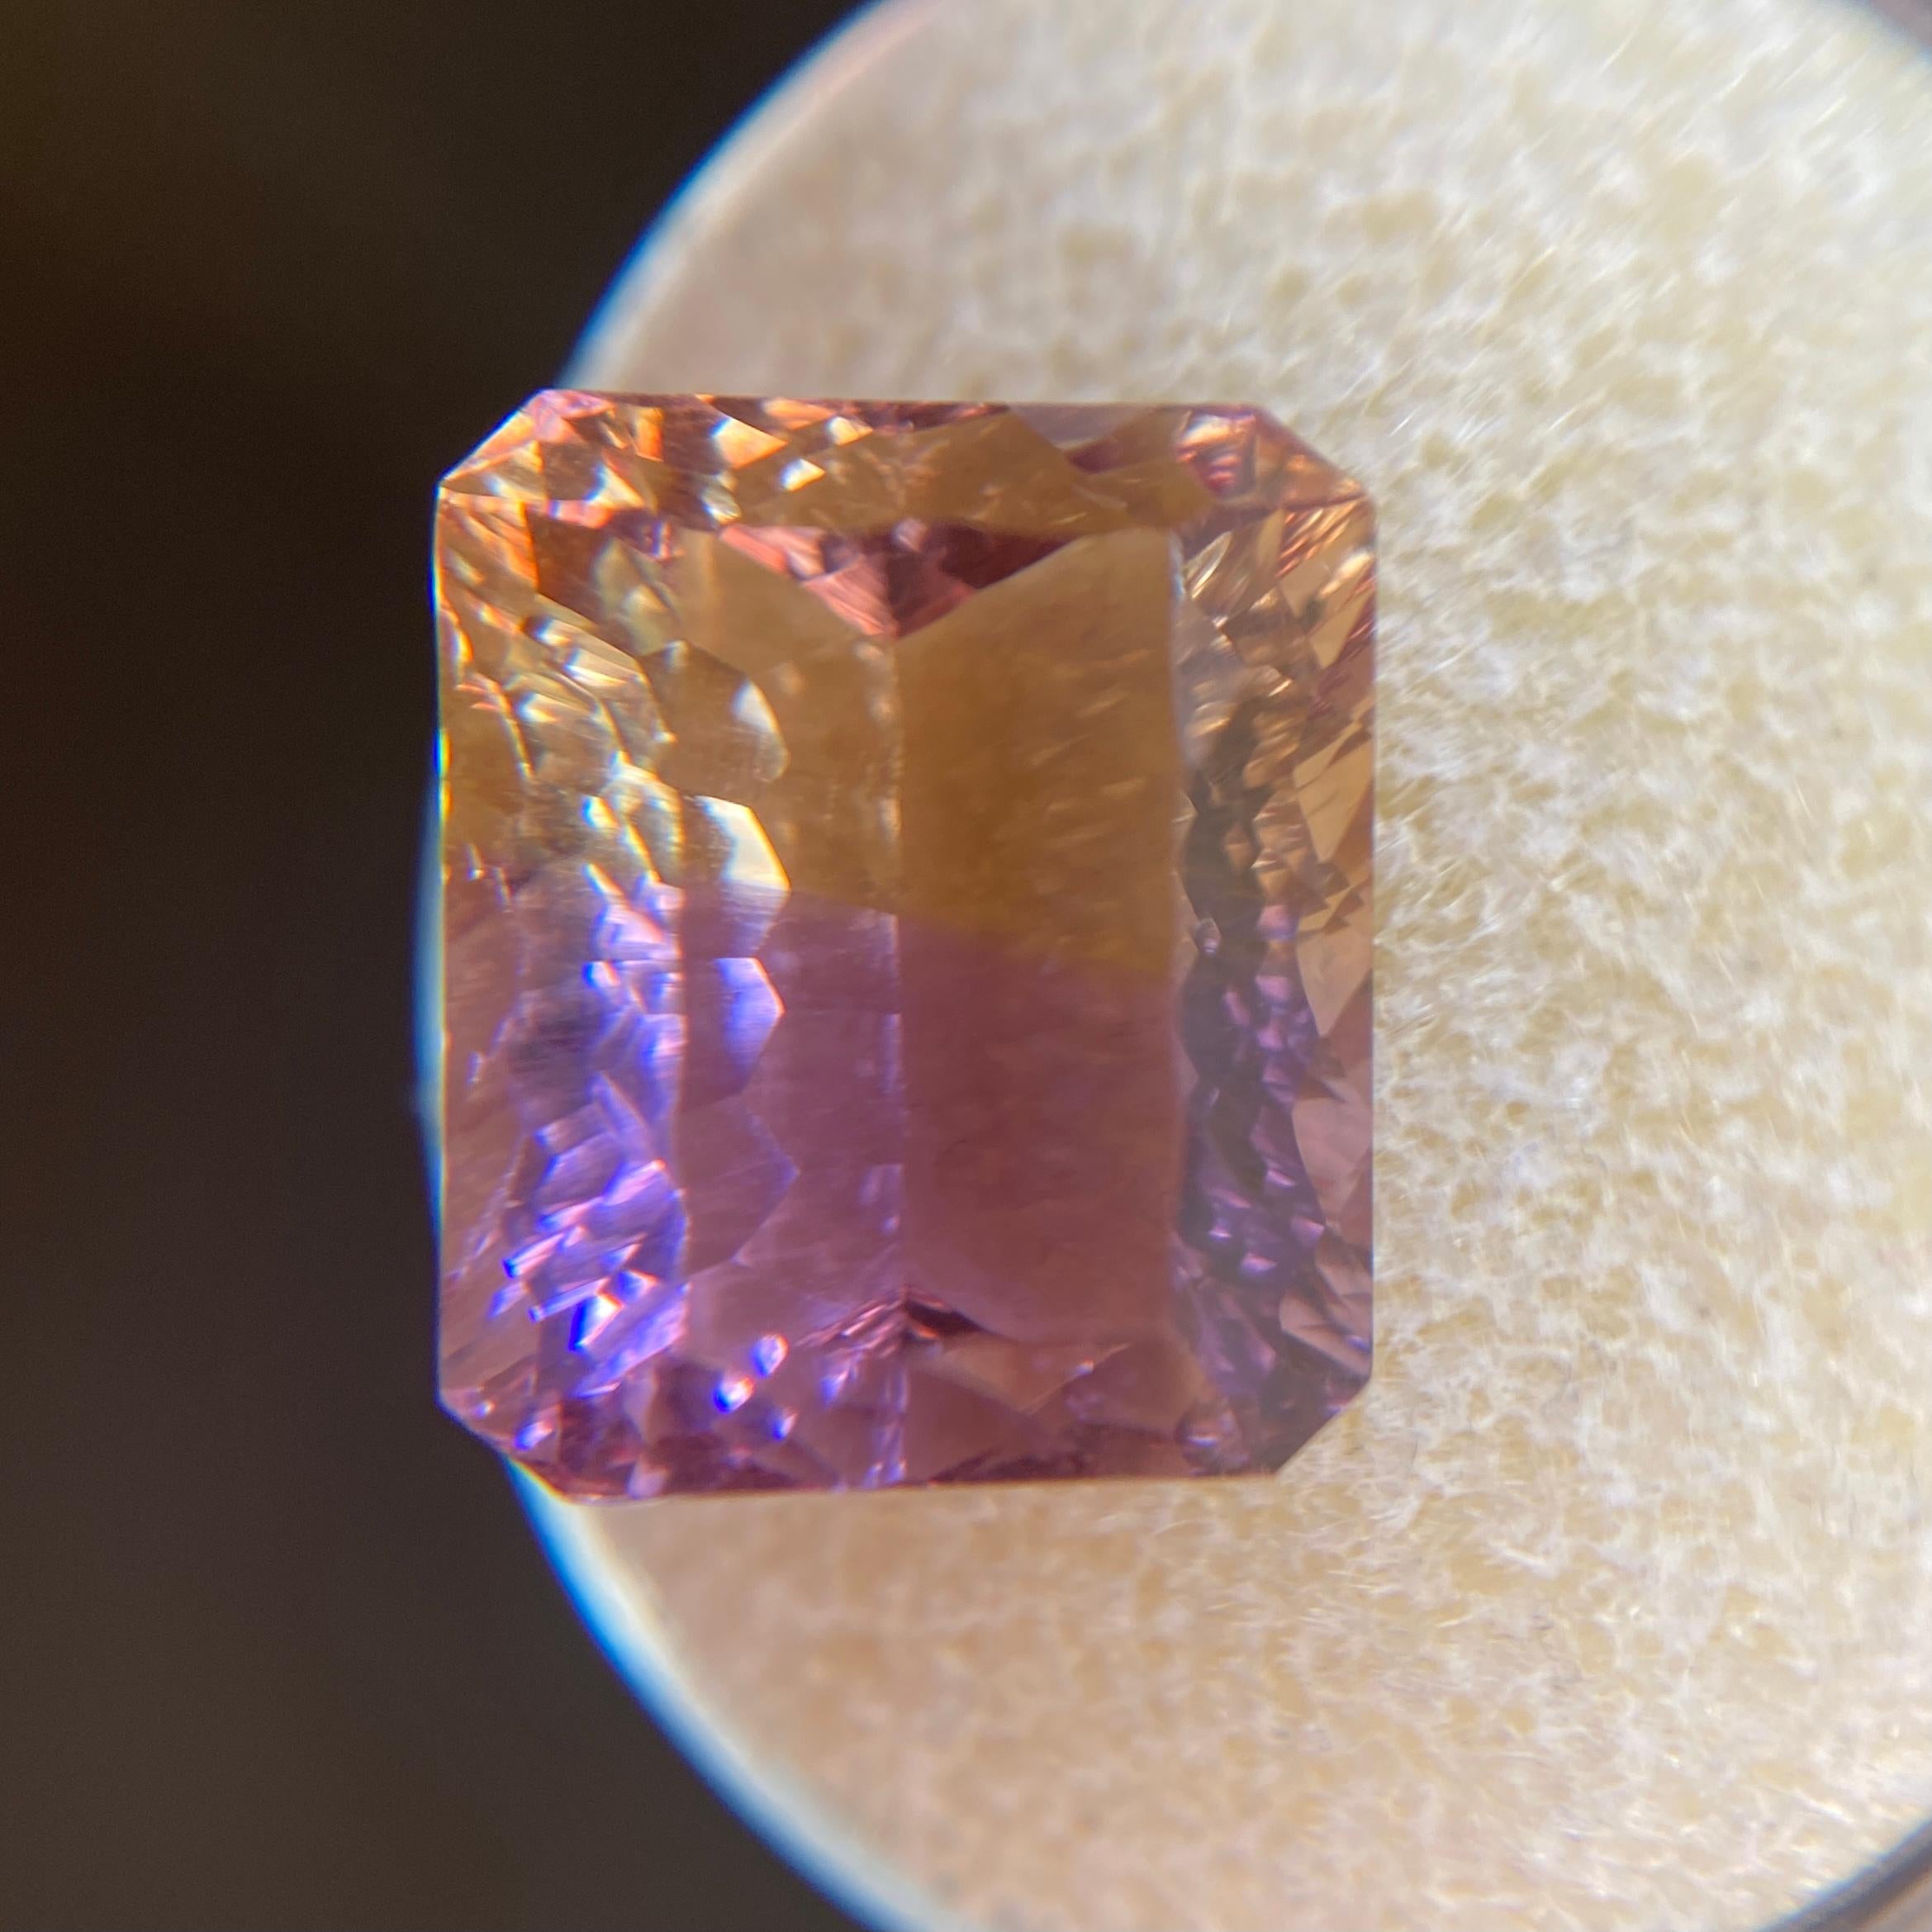 Fine Natural Ametrine Gemstone.

10.03 Carat natural Ametrine with an excellent fancy emerald octagon cut and beautiful colour split of yellow and purple.

Also has excellent clarity with only some small natural inclusions visible when looking